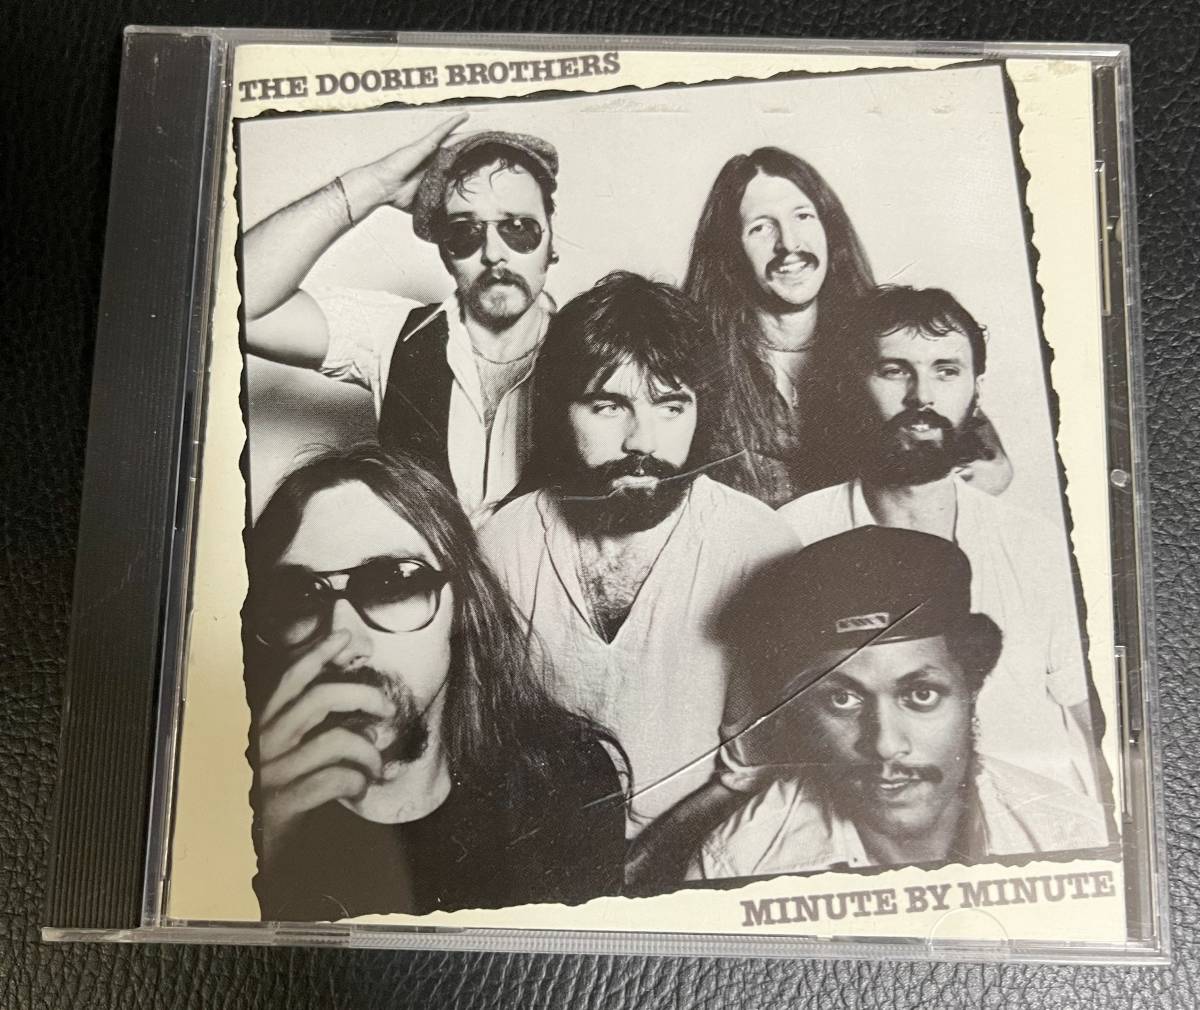 the doobie brothers minute by minute 激安 michael mcdonald amy holland hall and oates christopher cross stephen bishop steely dan_画像1